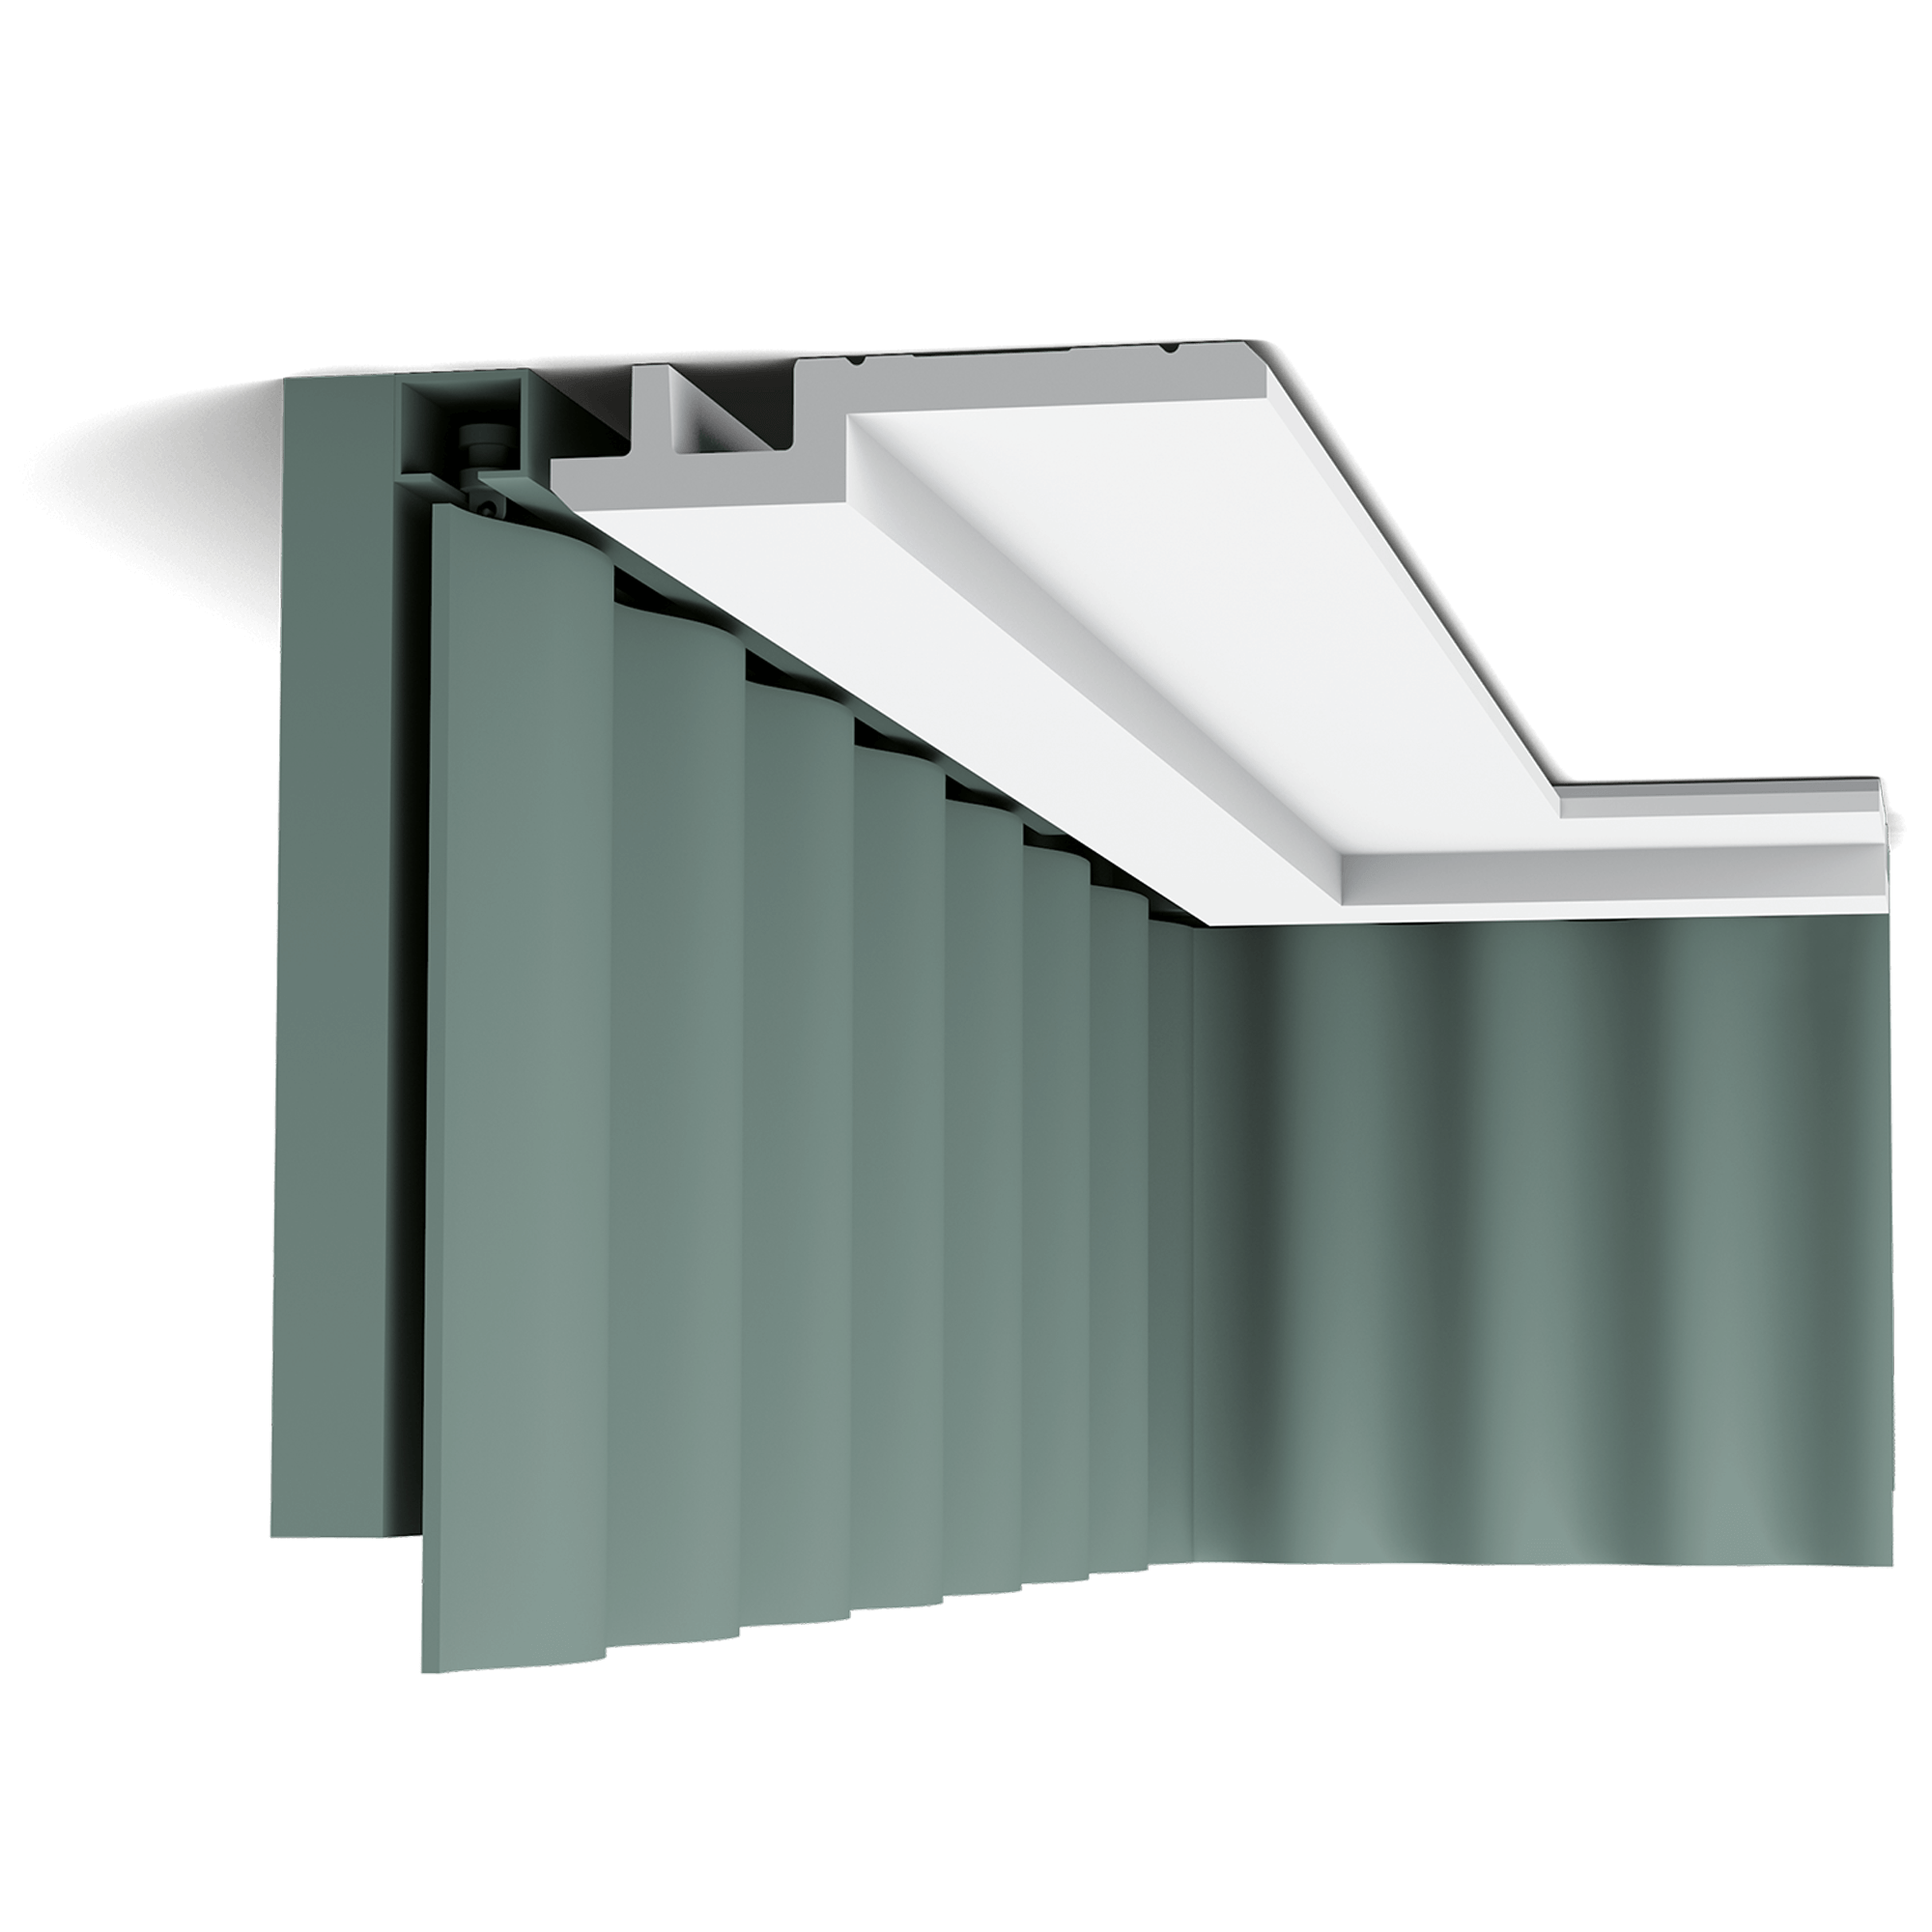 c395 curtain profile bf0d A clean, modern profile from the Steps range. Here we fix the largest section to the ceiling, making the space seem wider. The angled corners above and below provide additional subtle shadow lines. Designed by Orio Tonini.